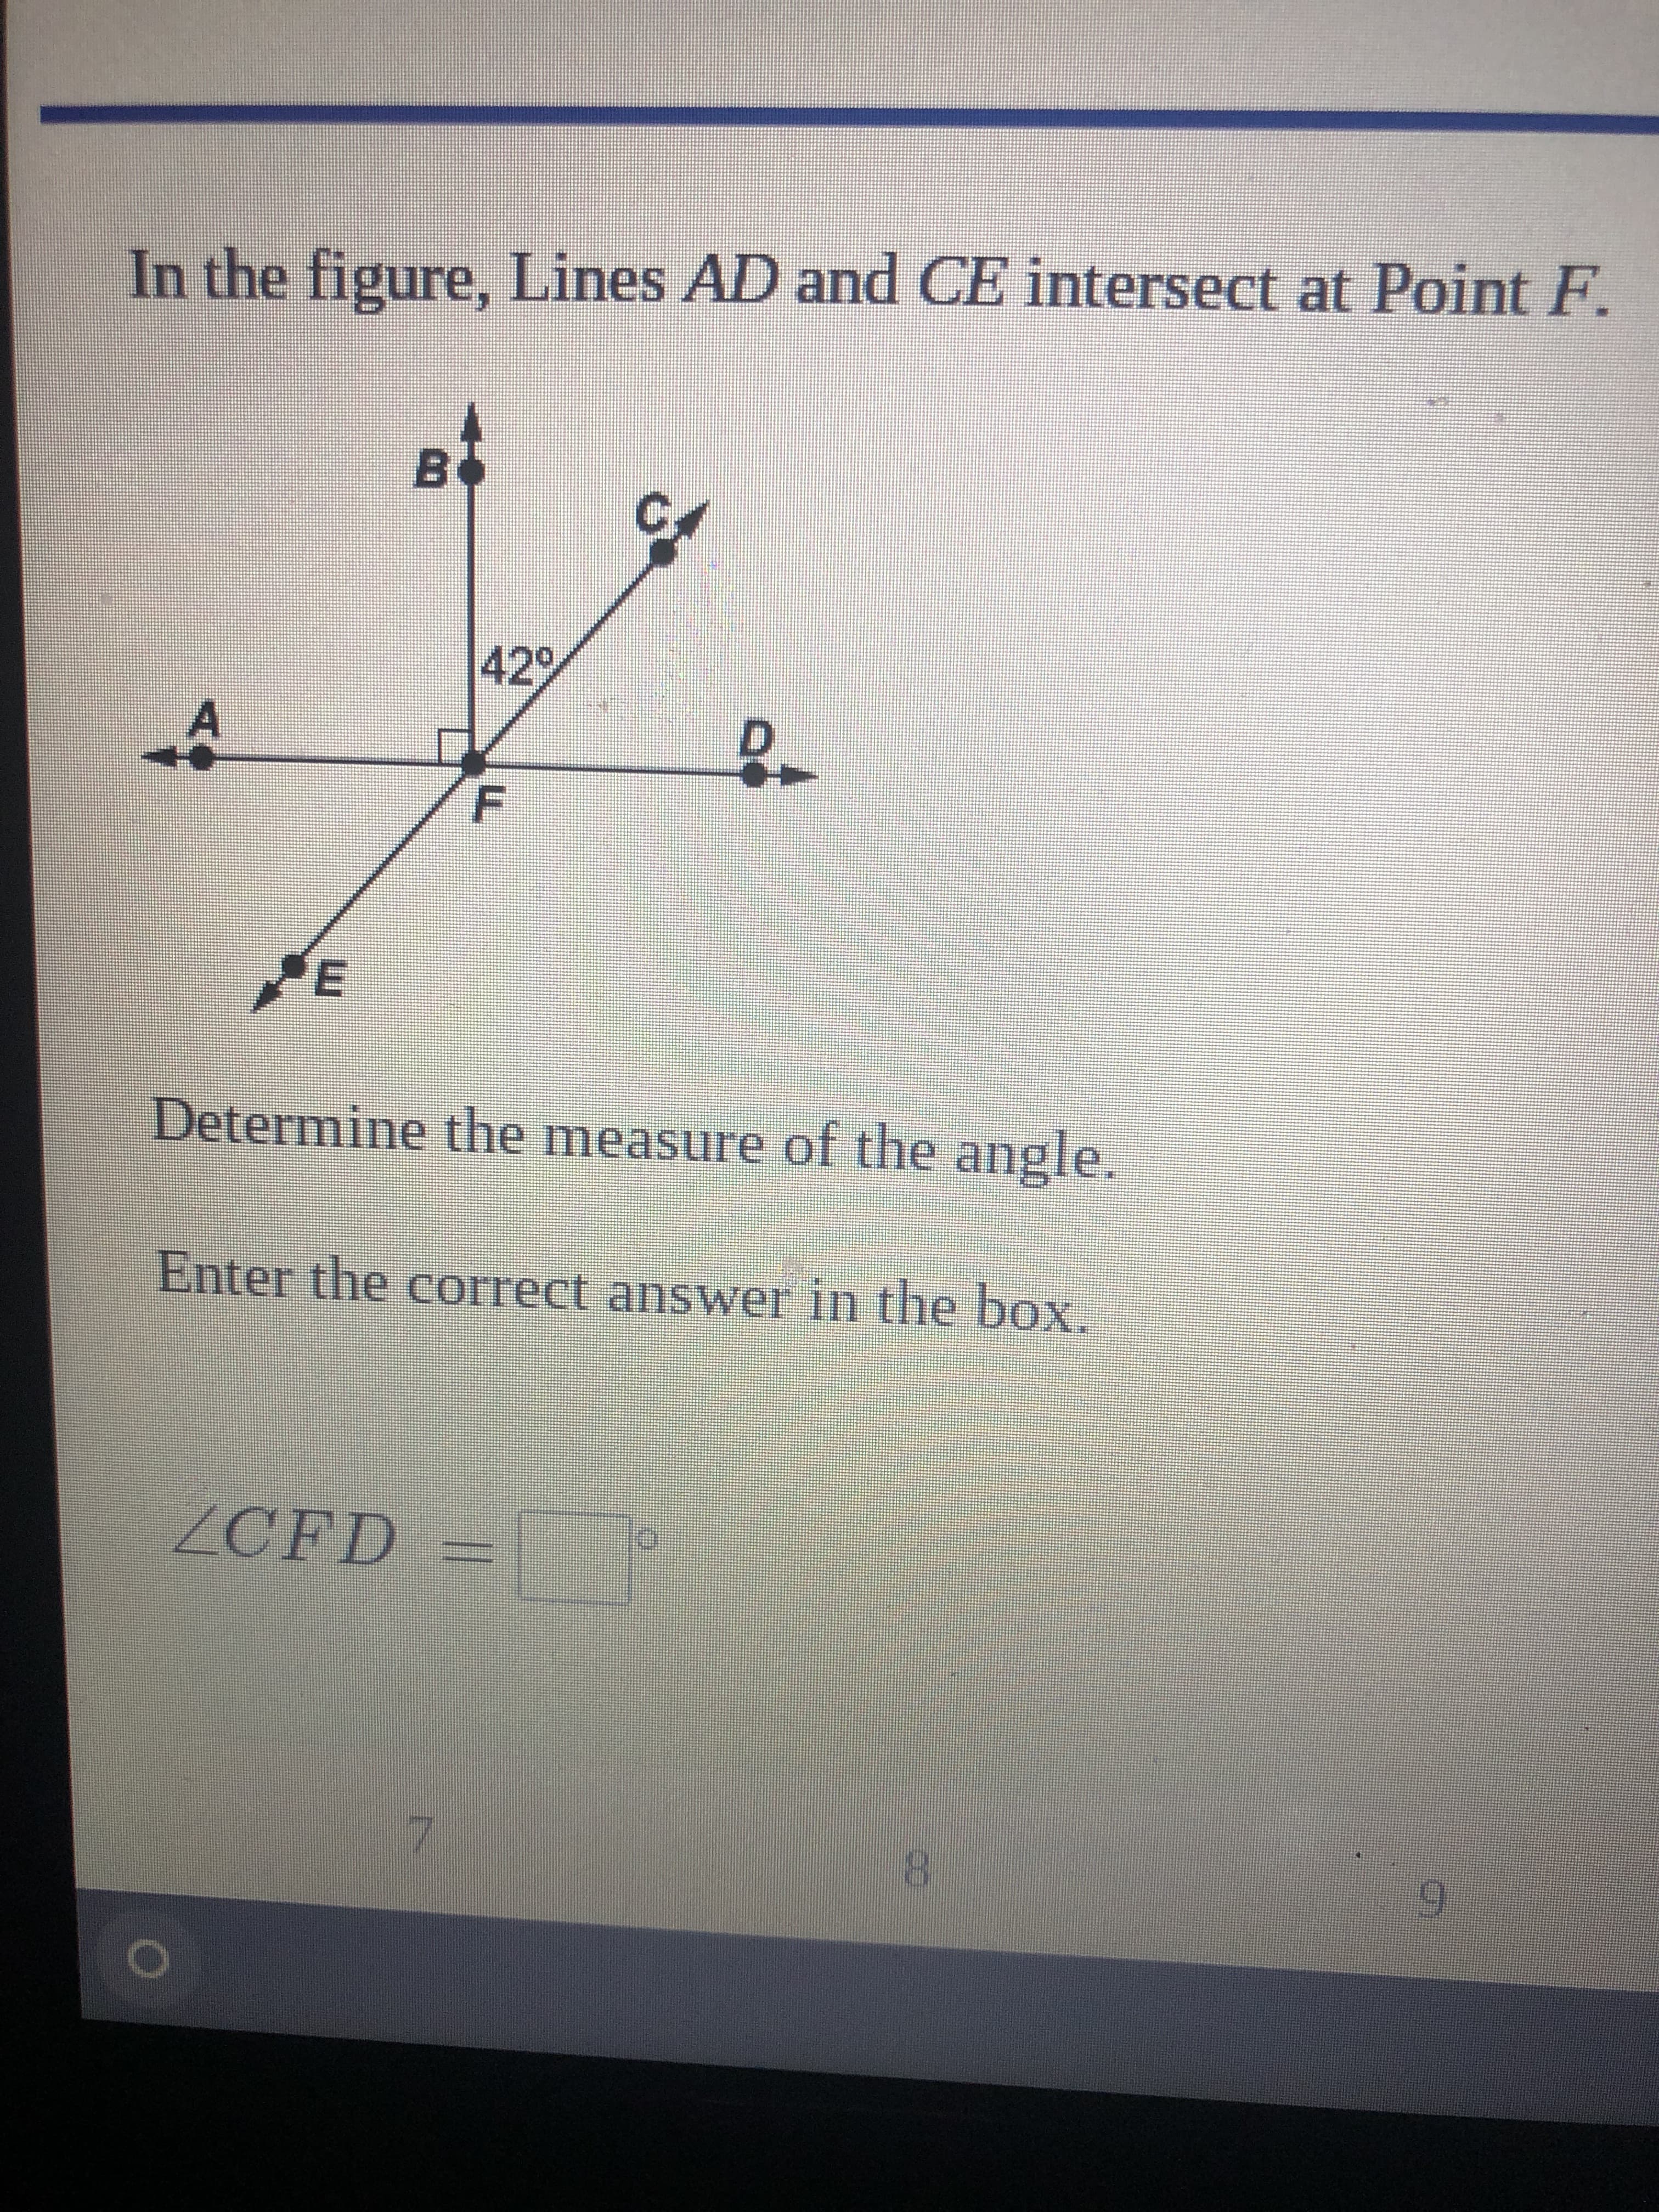 In the figure, Lines AD and CE intersect at Point F.
429
Determine the measure of the angle.
Enter the correct answer in the box.
ZCFD=
